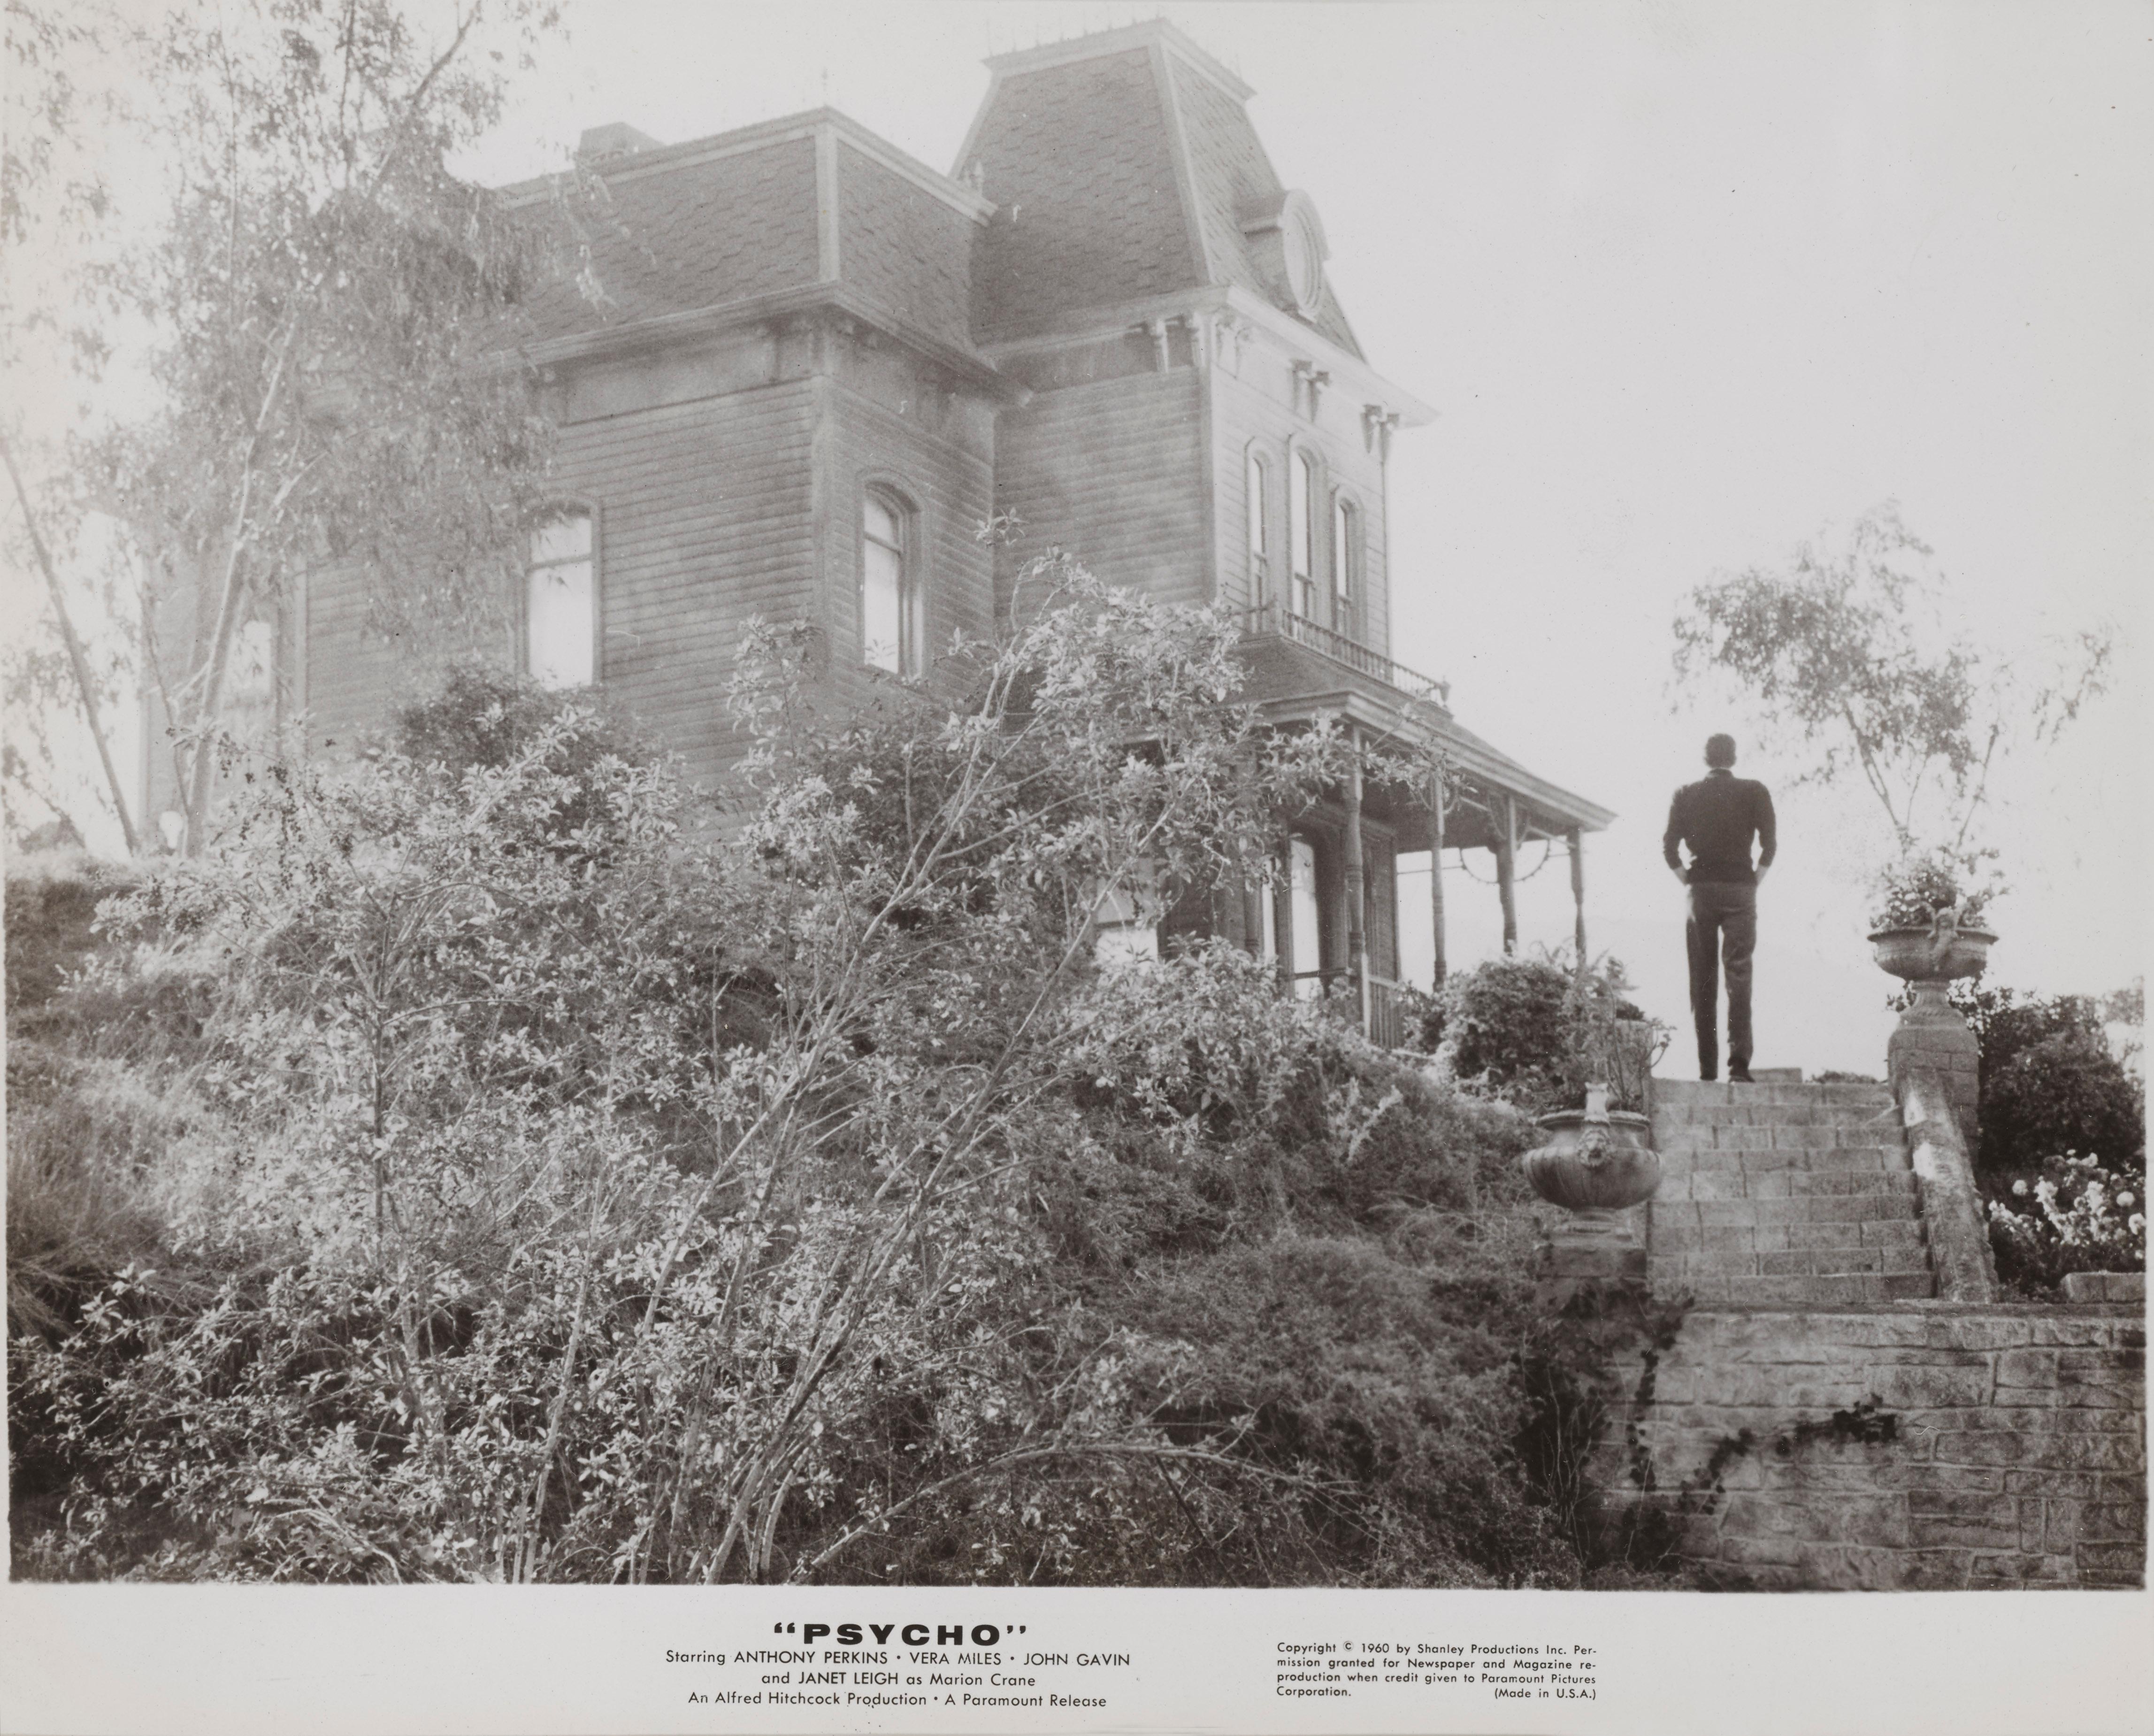 Original Paramount studio photographic production still for Alfred Hitchcock's 1960 Horror, Thriller Psycho, starring Anthony Perkins, Janet Leigh, Vera Miles. The image is the most iconic image from the film. This piece is conservation framed with